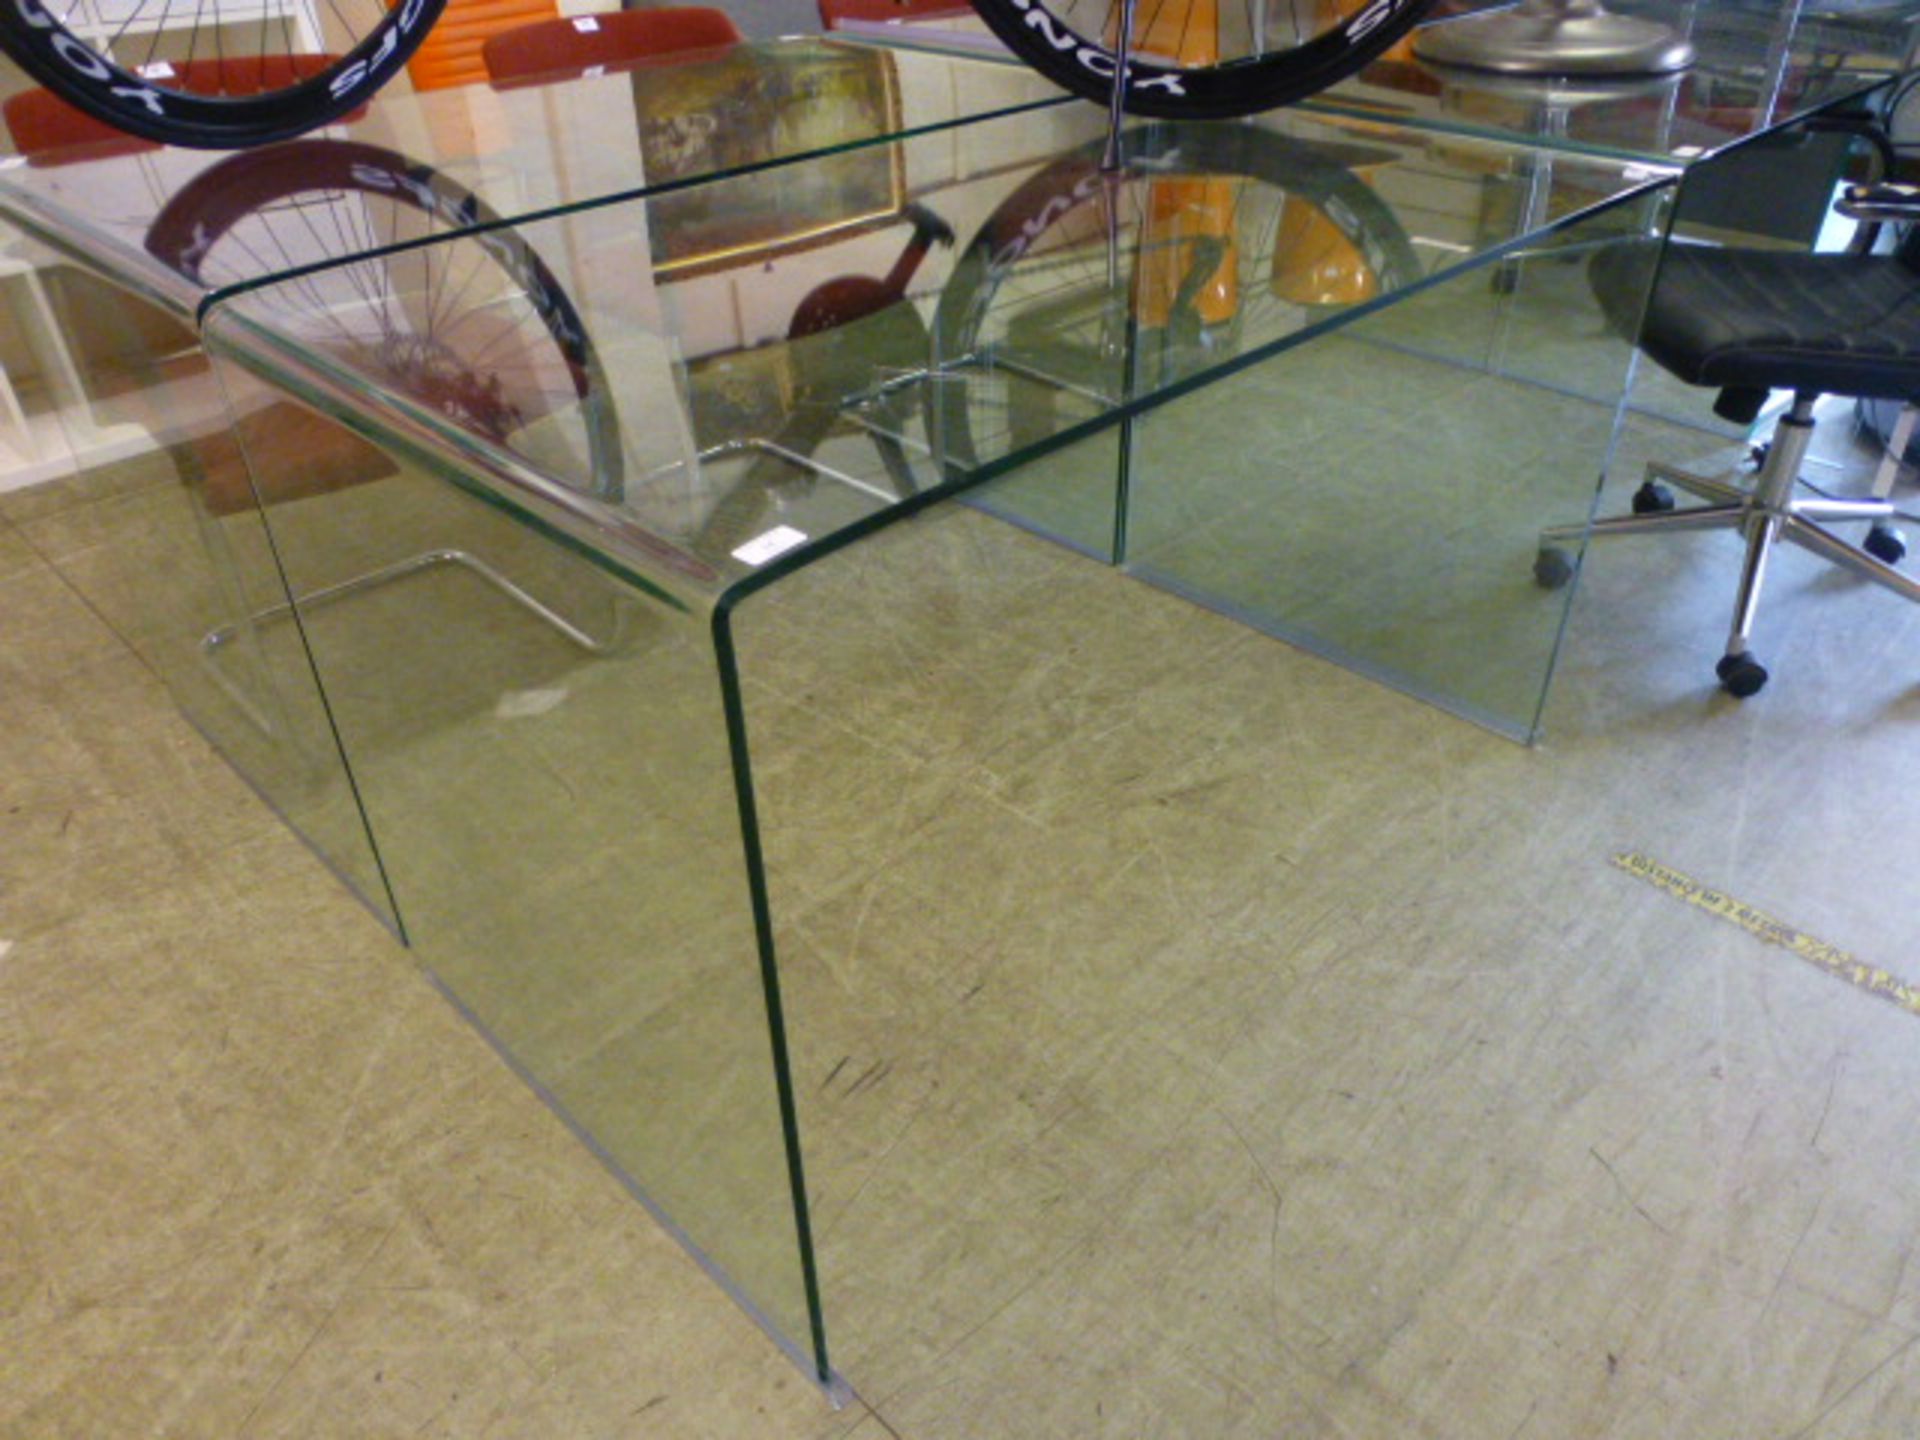 A curved glass table/desk